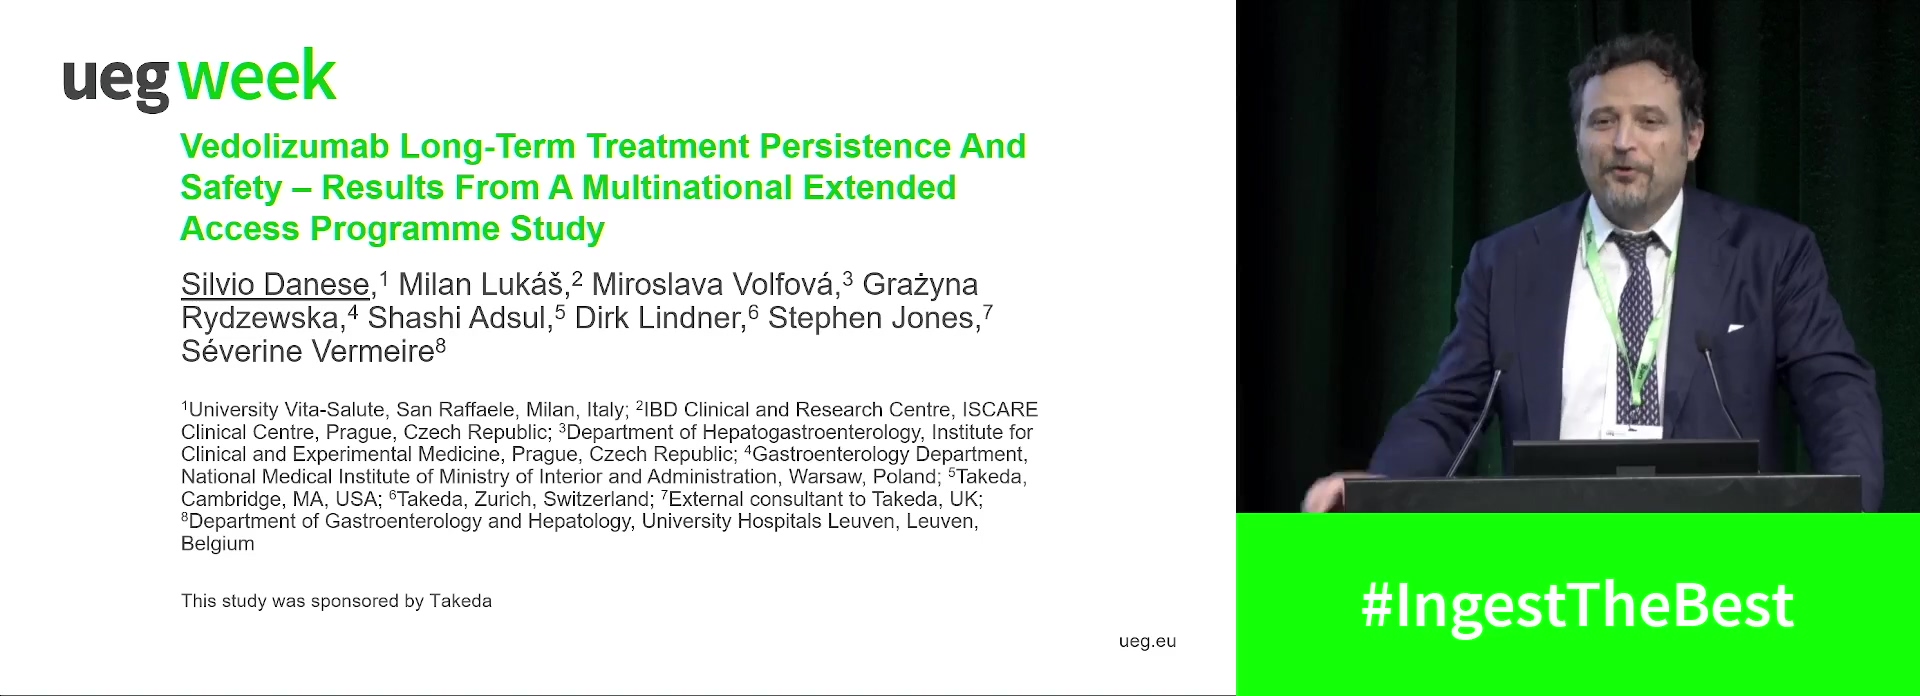 VEDOLIZUMAB LONG-TERM TREATMENT PERSISTENCE AND SAFETY – RESULTS FROM A MULTINATIONAL EXTENDED ACCESS PROGRAMME STUDY